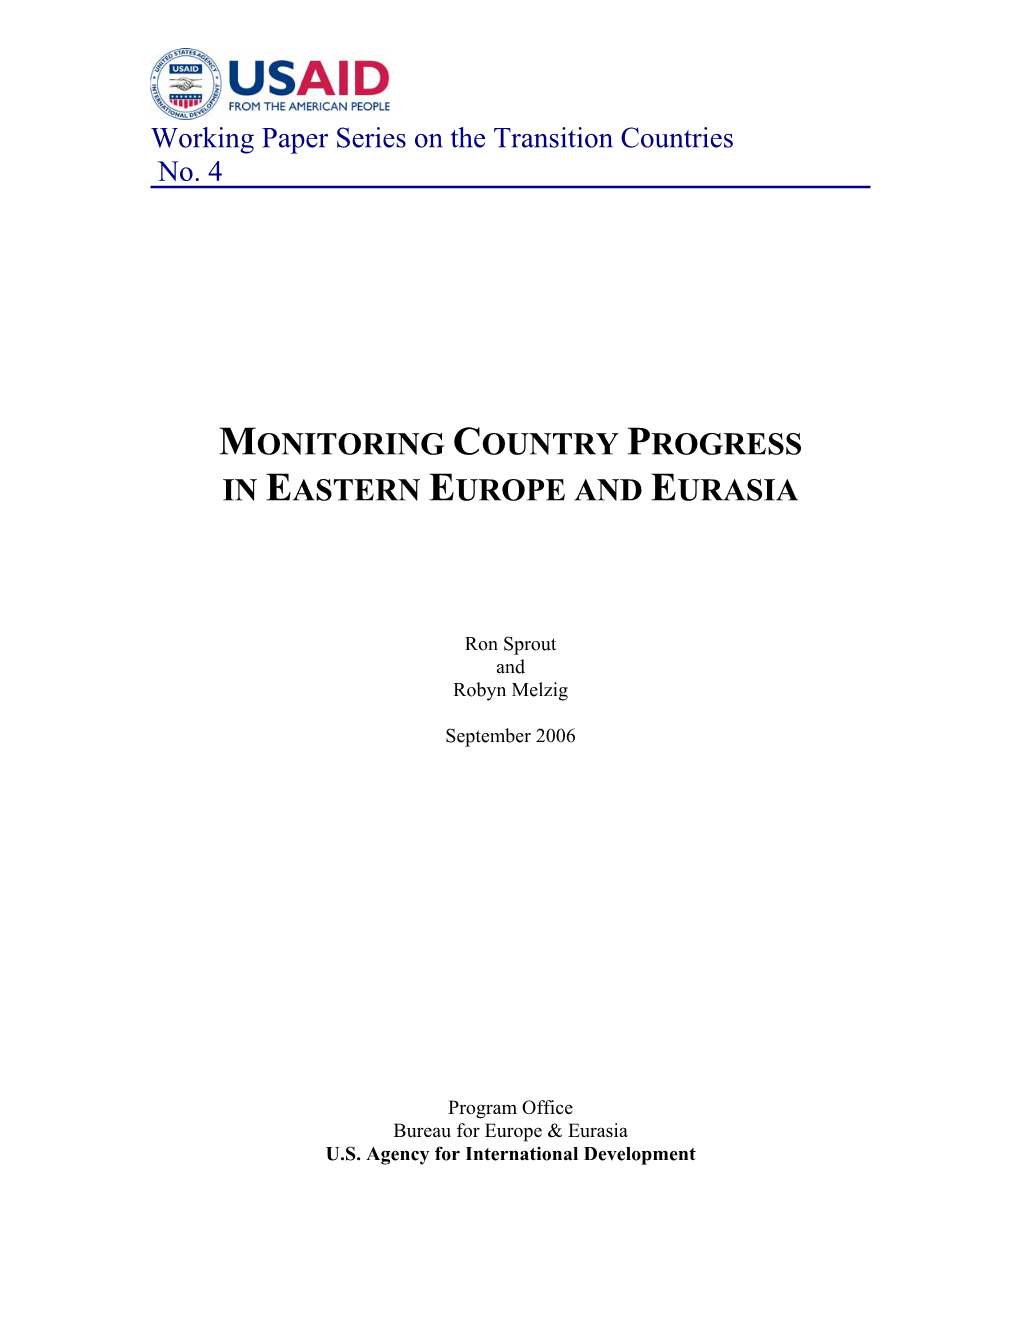 No. 4 Monitoring Country Progress in Eastern Europe and Eurasia